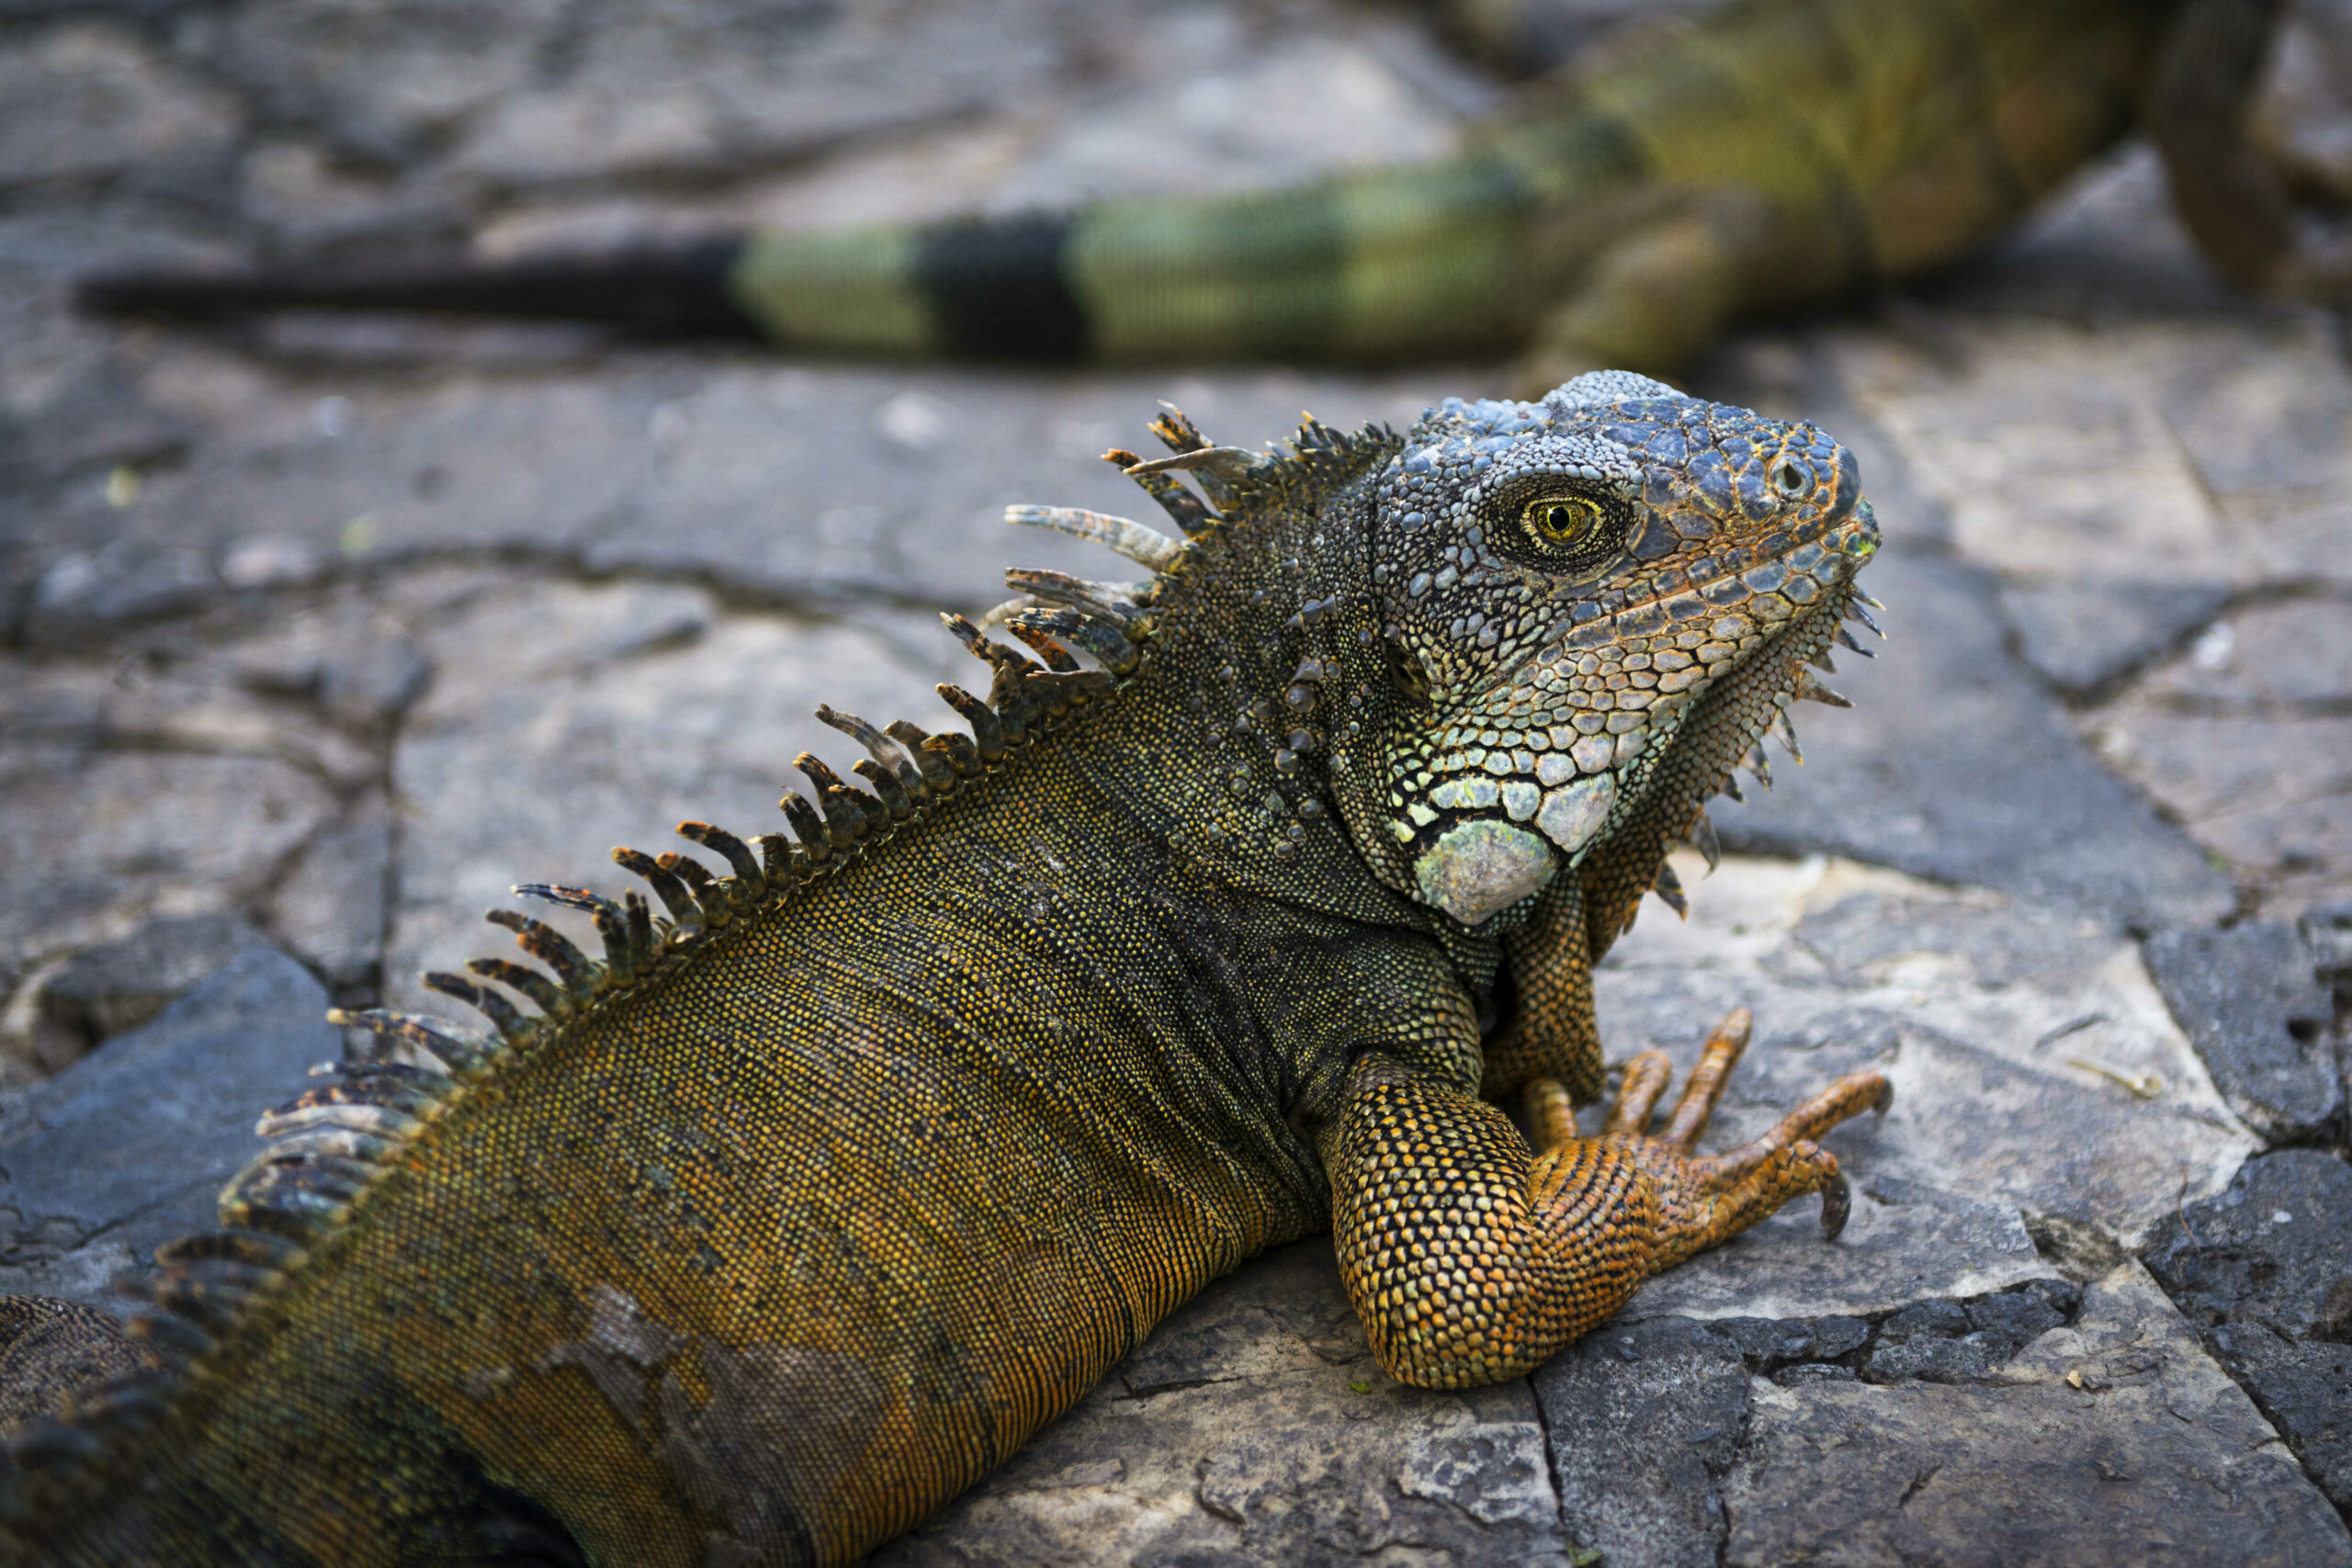 Are male iguanas more colorful